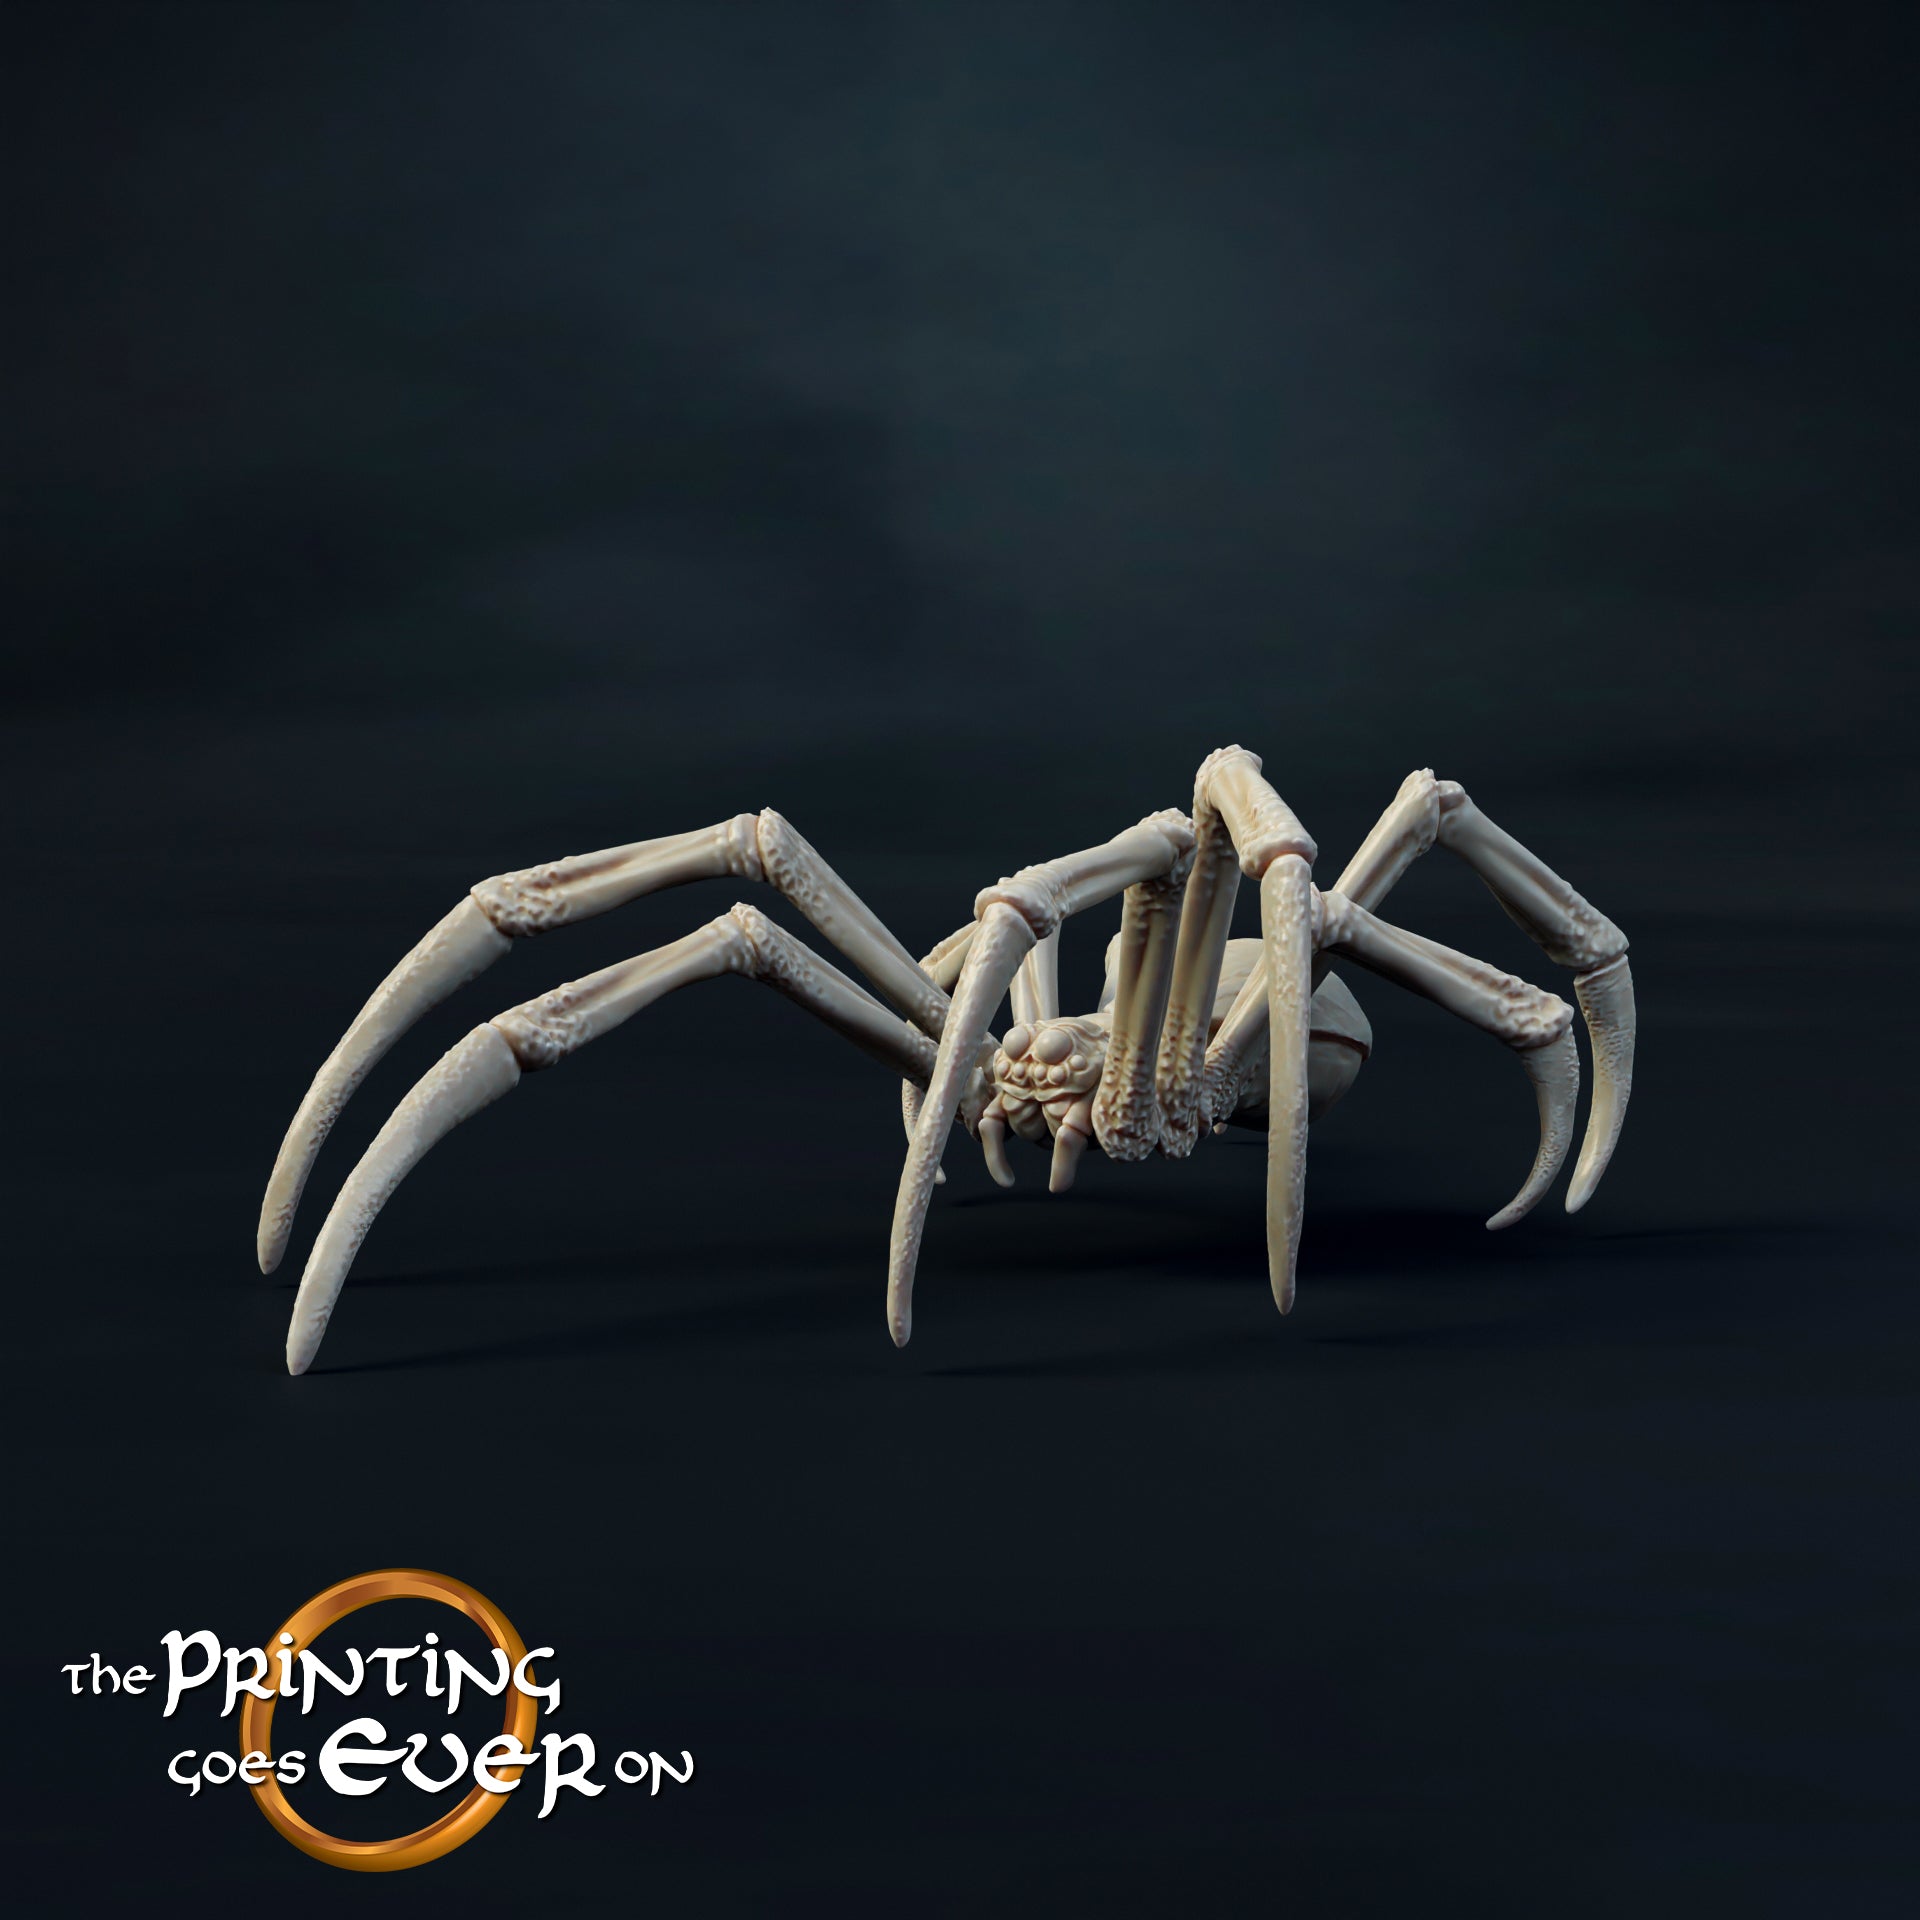 Giant spider D, small